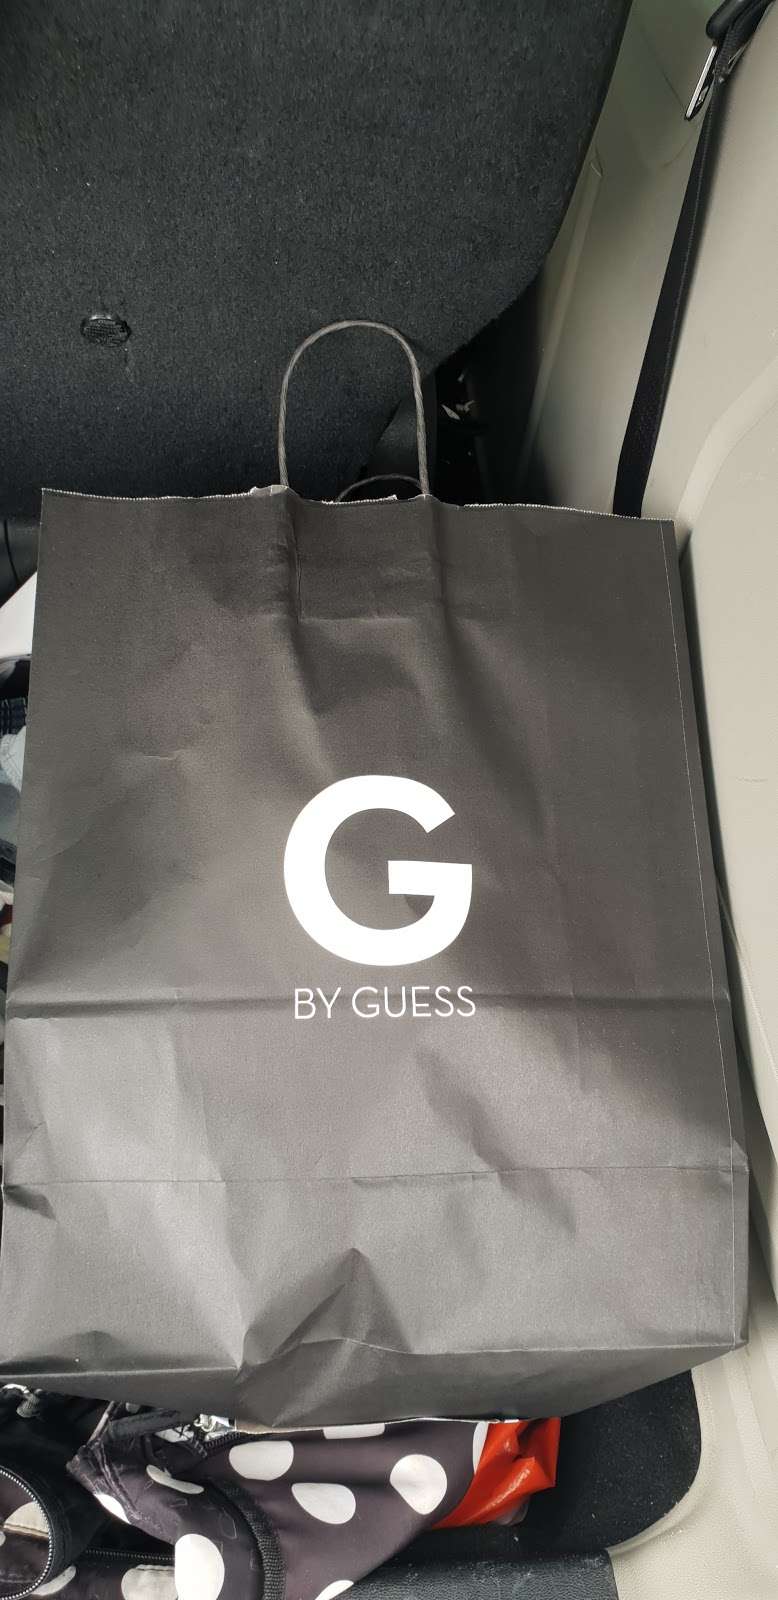 G by GUESS | 2621 W Osceola Pkwy Space B35, Kissimmee, FL 34741 | Phone: (407) 847-0448